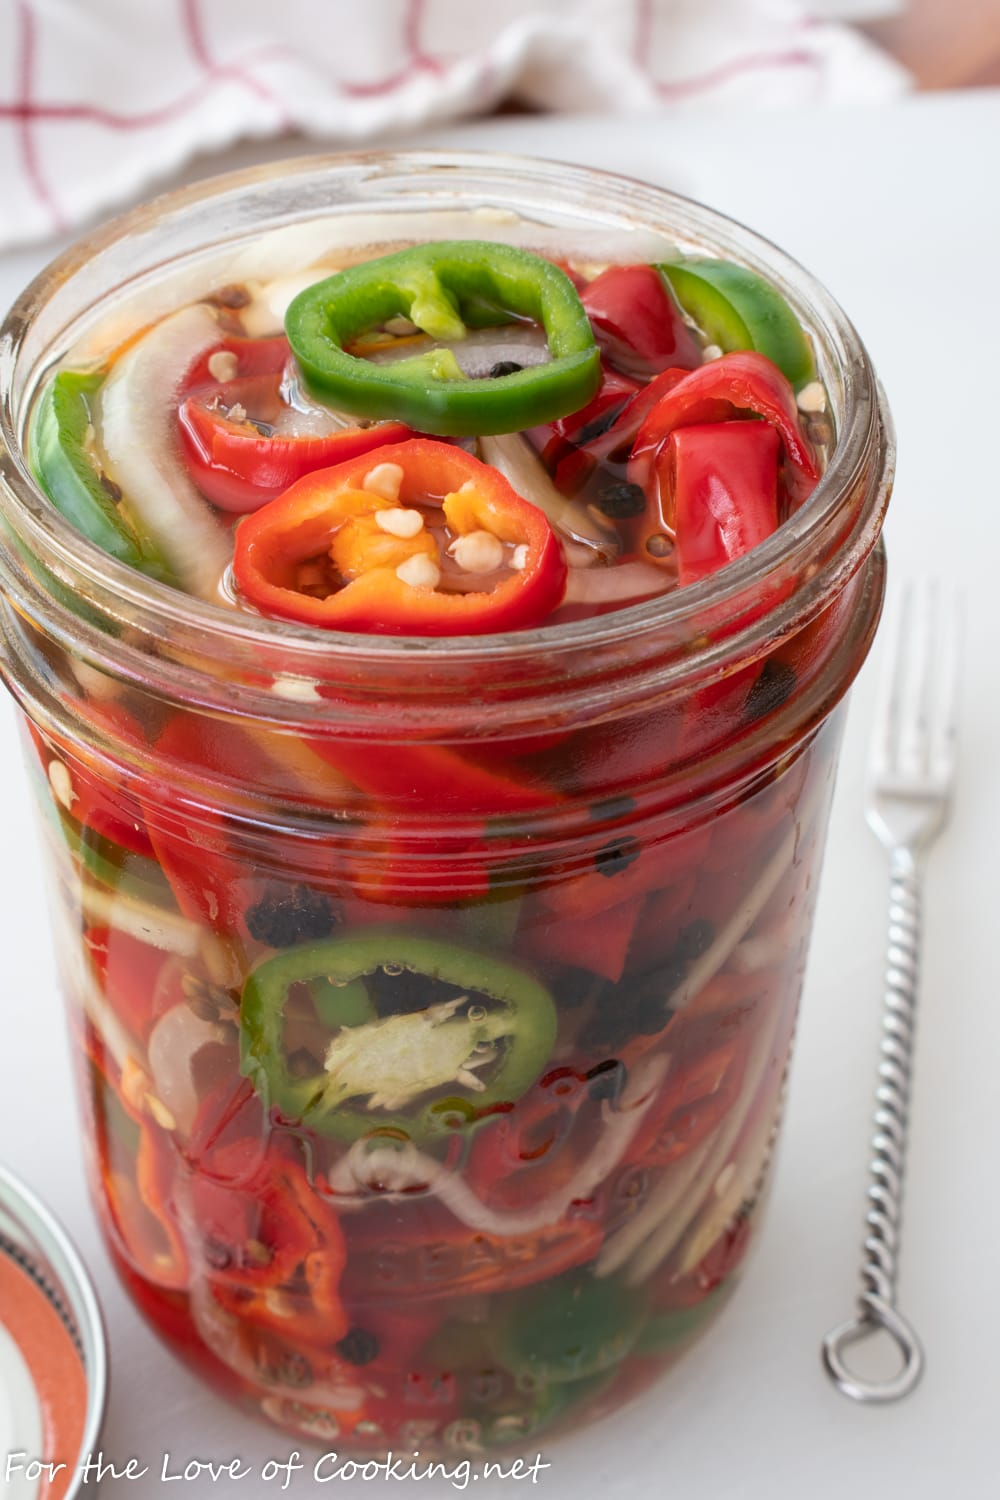 15 Pickle and Pickled Vegetable Recipes